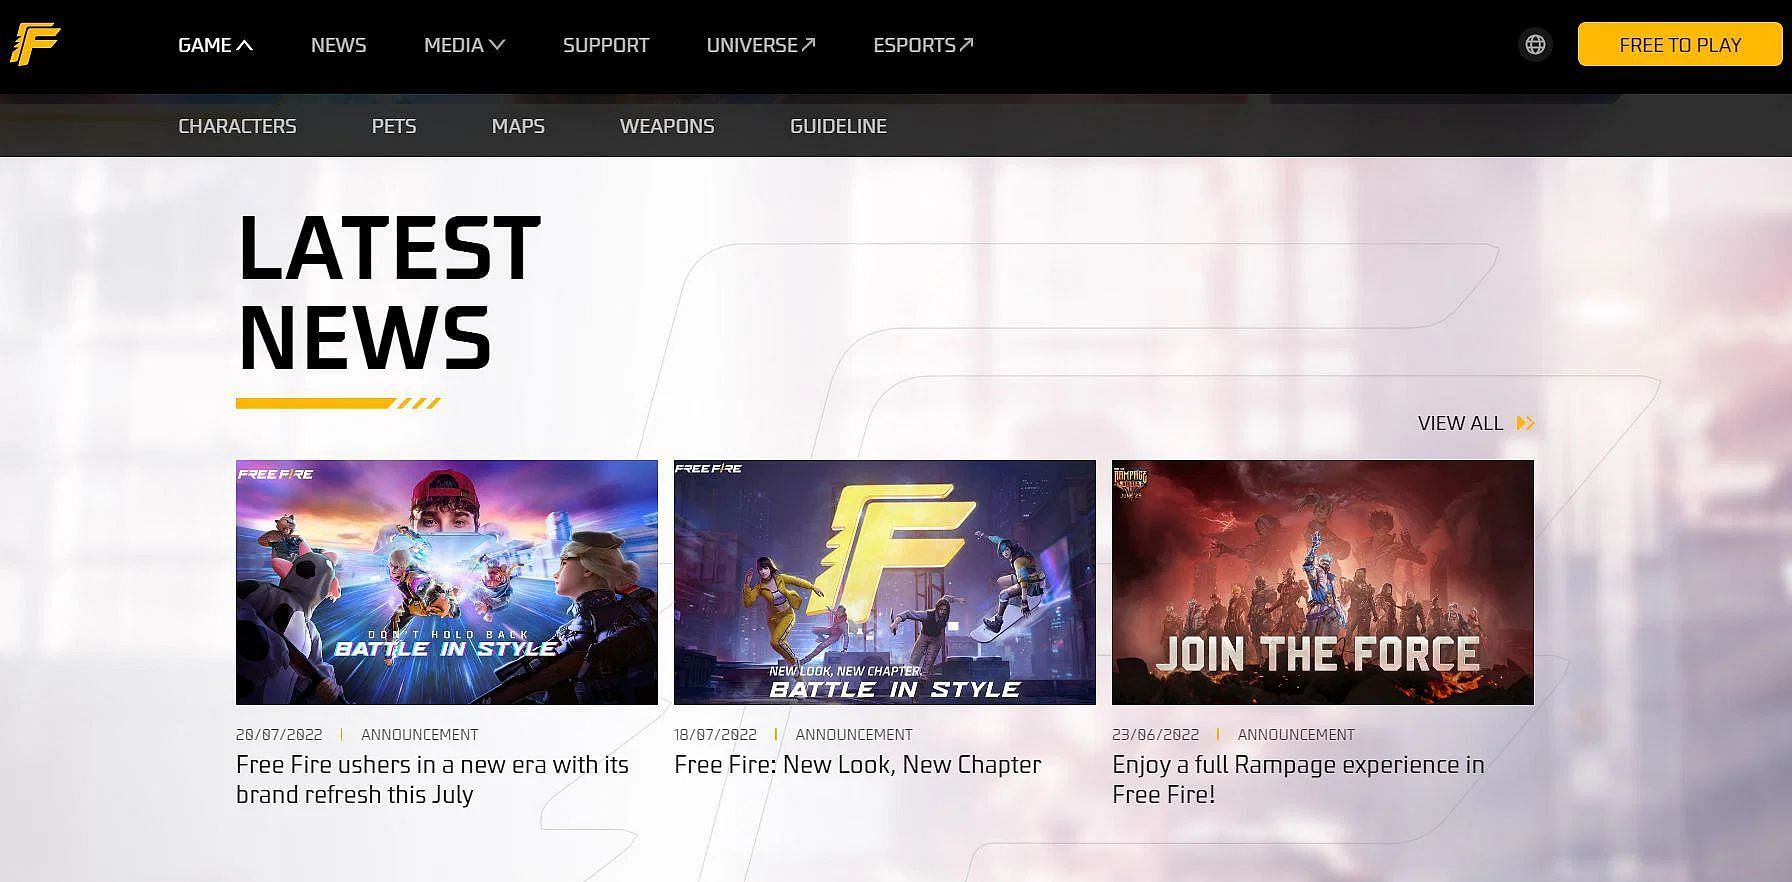 The news section of the official website (Image by Garena)